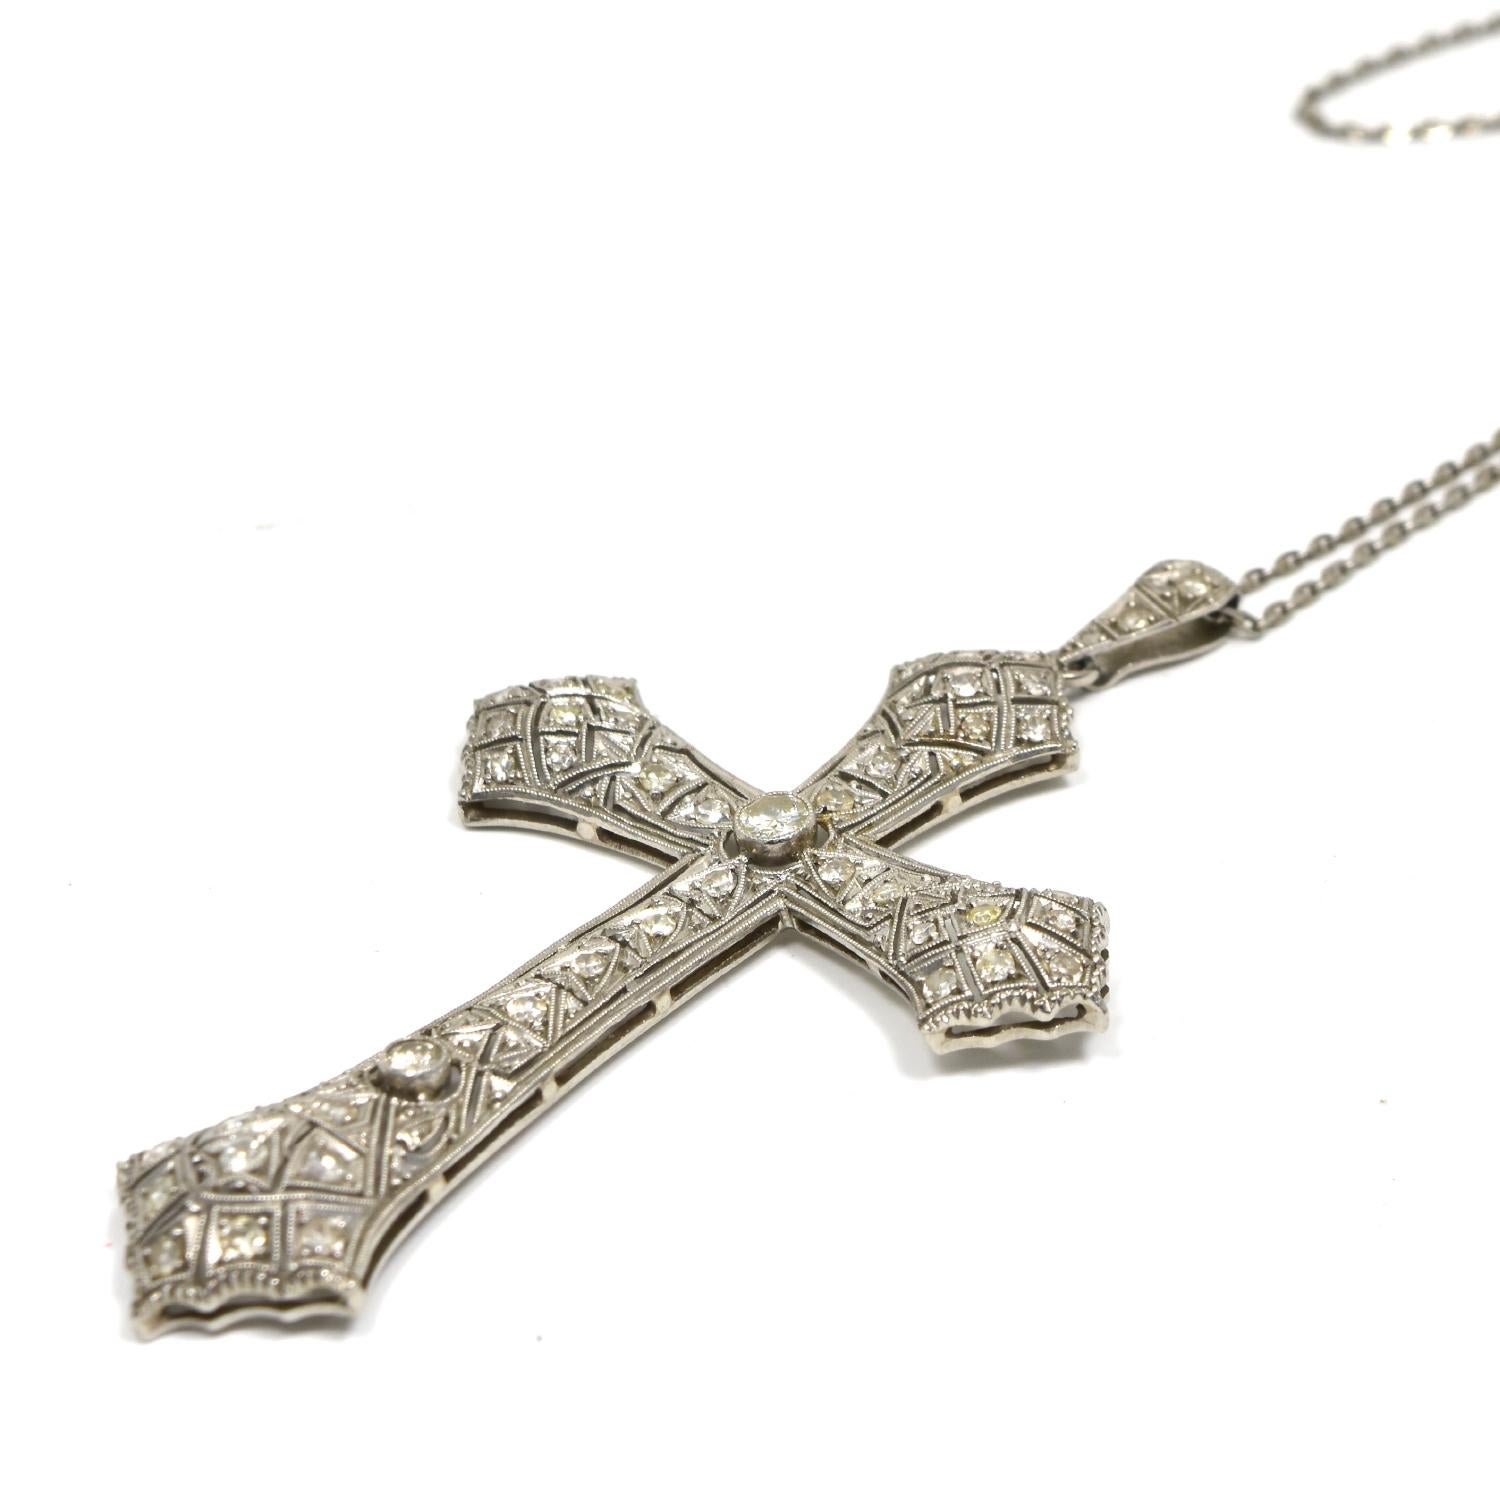 Theme: Cross

​​​​​​​Metal: Platinum

Metal Purity: 950

Stones: Round Brilliant Cut Diamonds

Total Carat Weight:  Approx. 1.53 ct

Total Item Weight (g): 10.7 g

Necklace Length: 18 inches

Cross Dimensions: approx. 4 x 6 cm